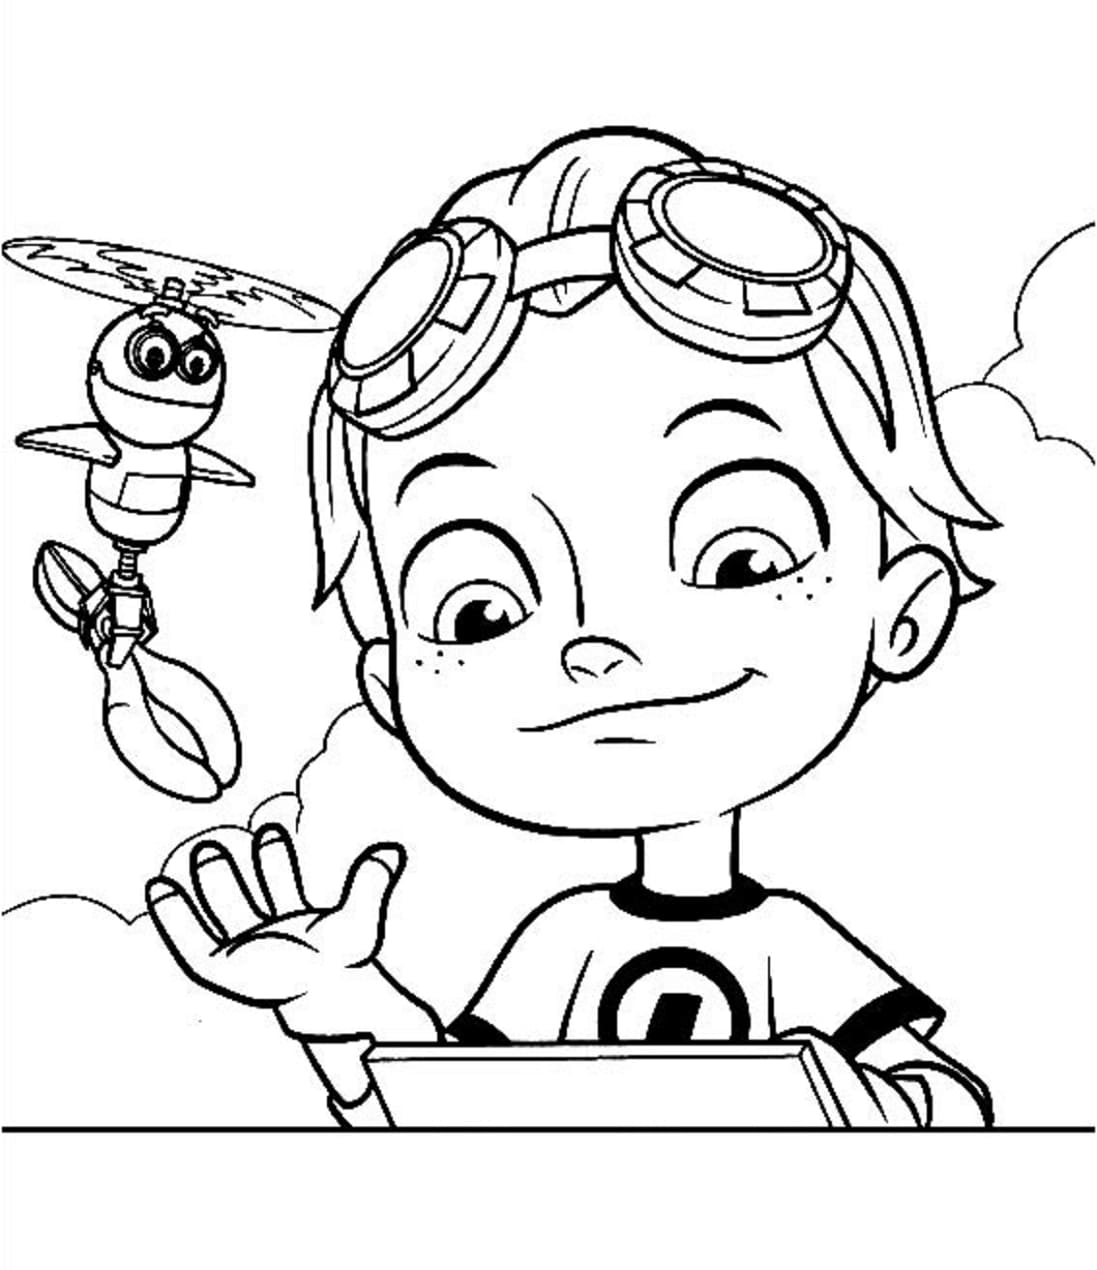 Rusty Rivets Whirly et Rusty coloring page